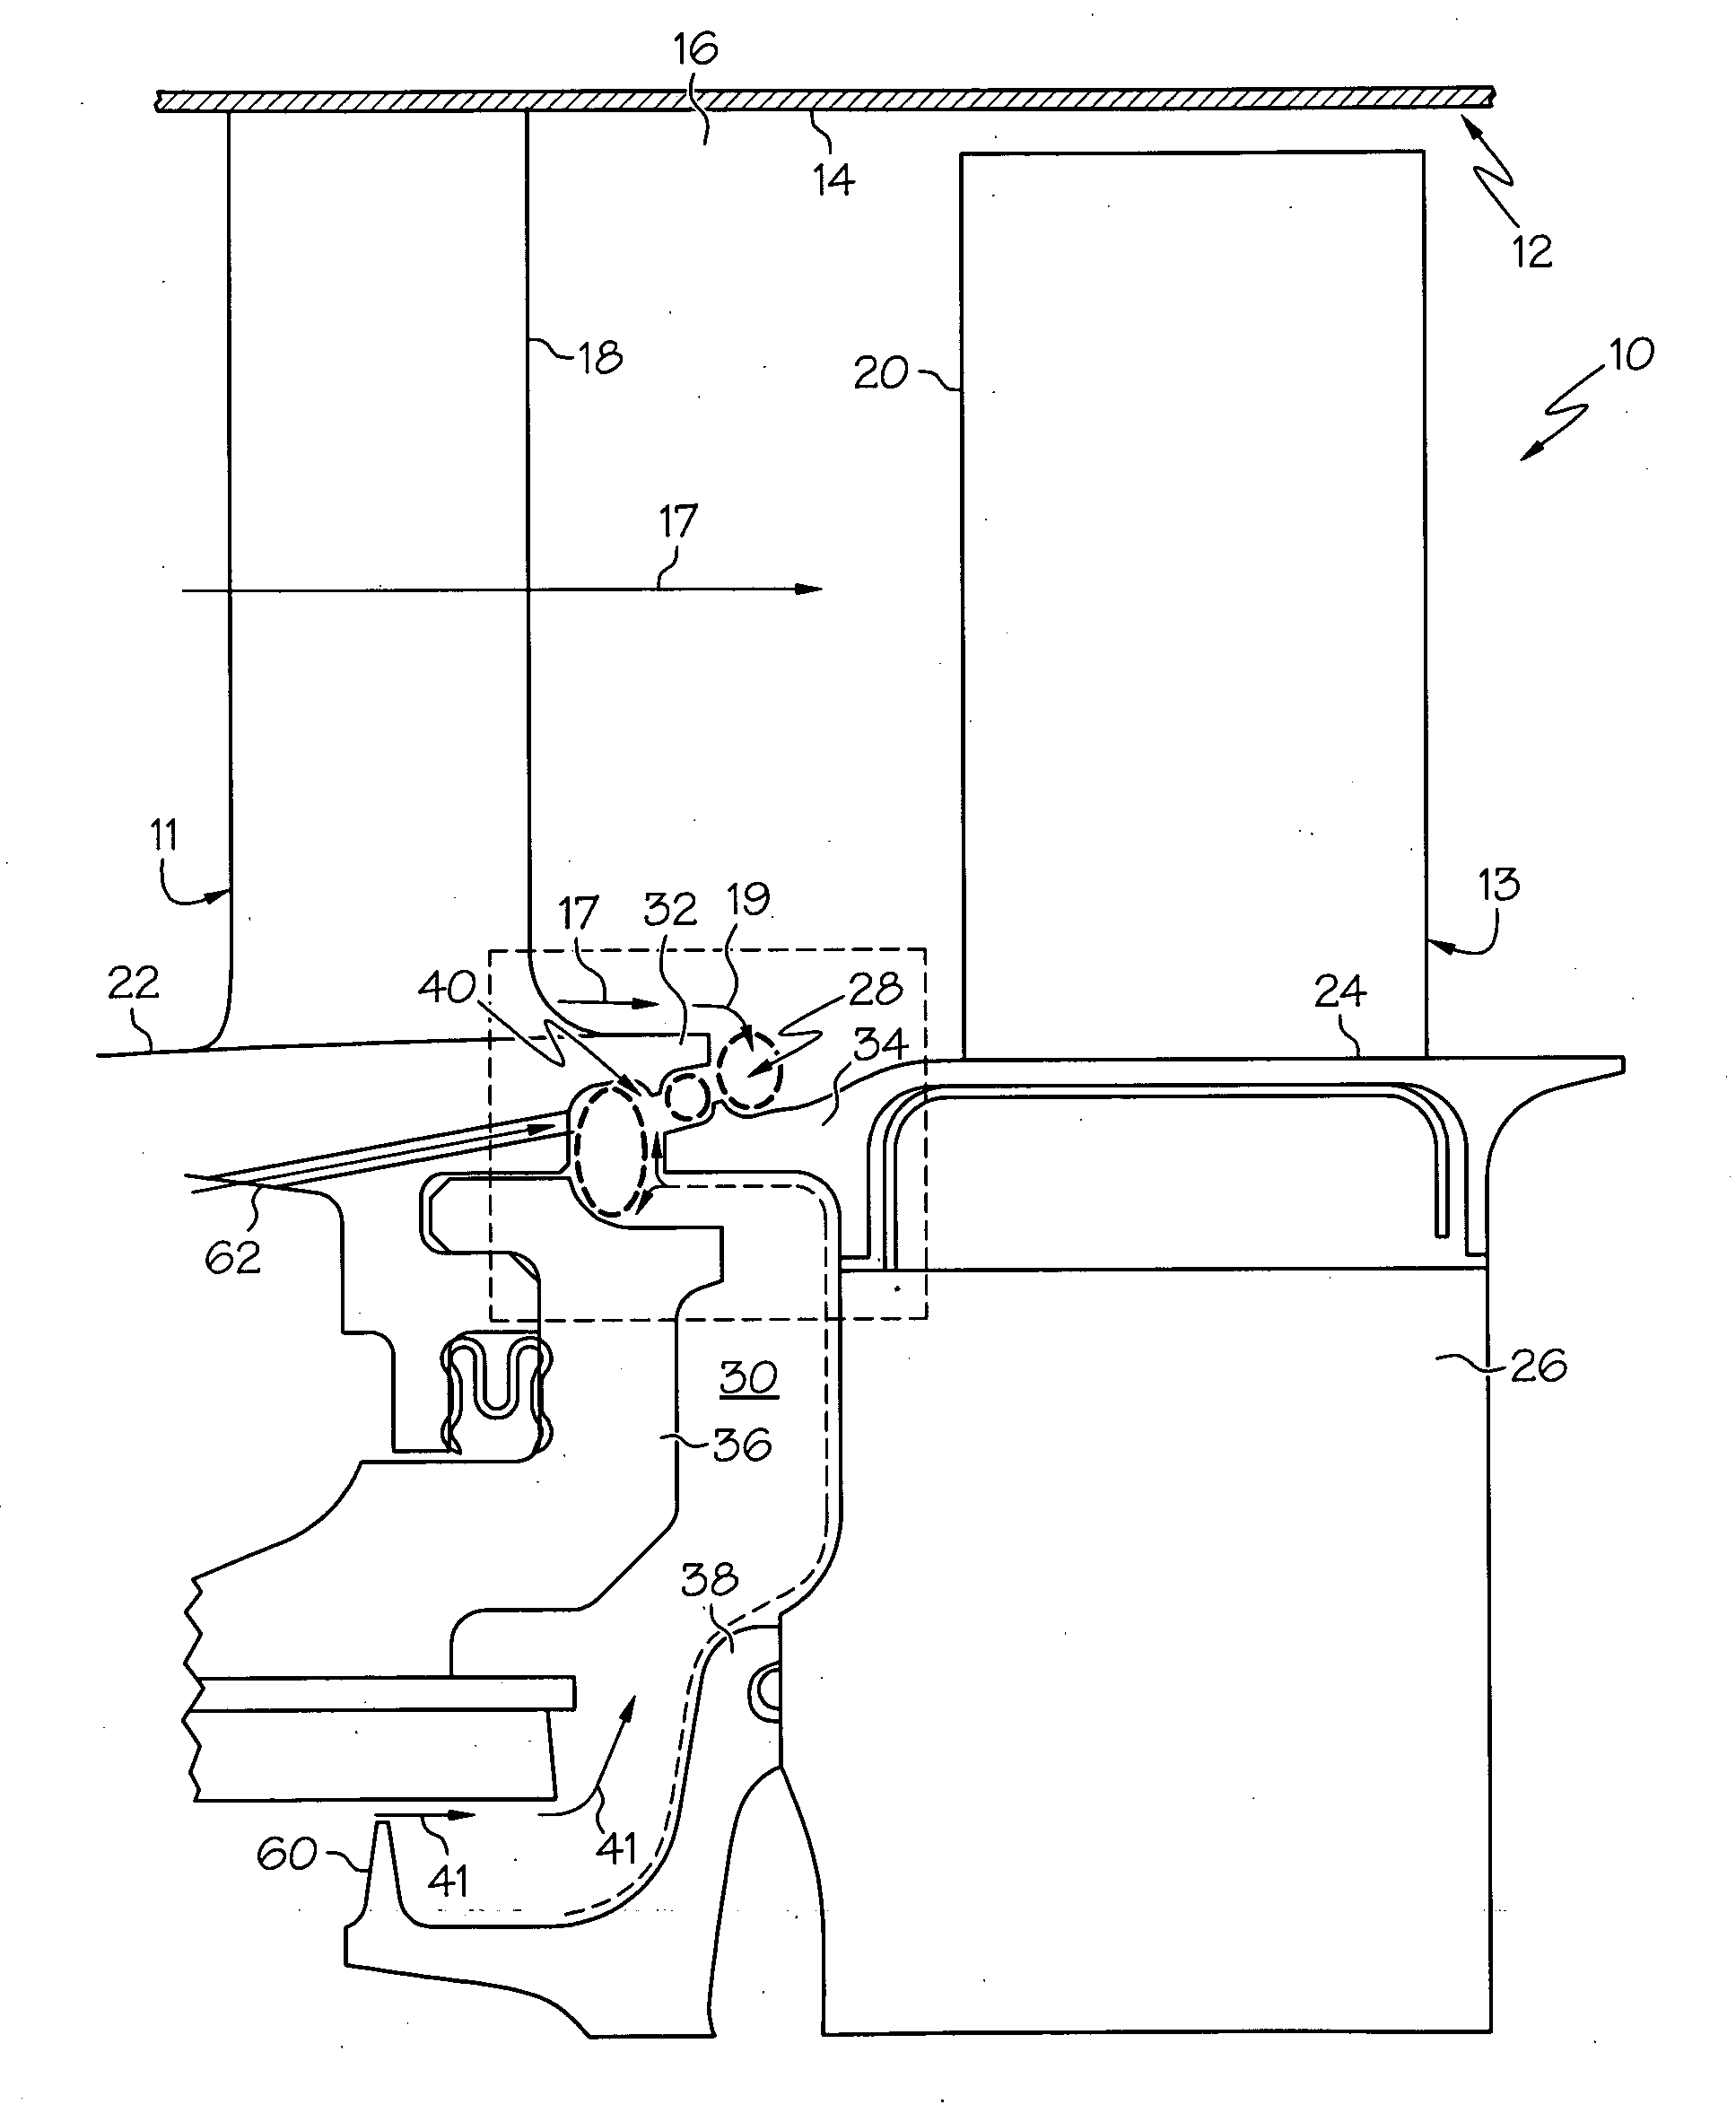 Gas turbine engine assemblies with recirculated hot gas ingestion